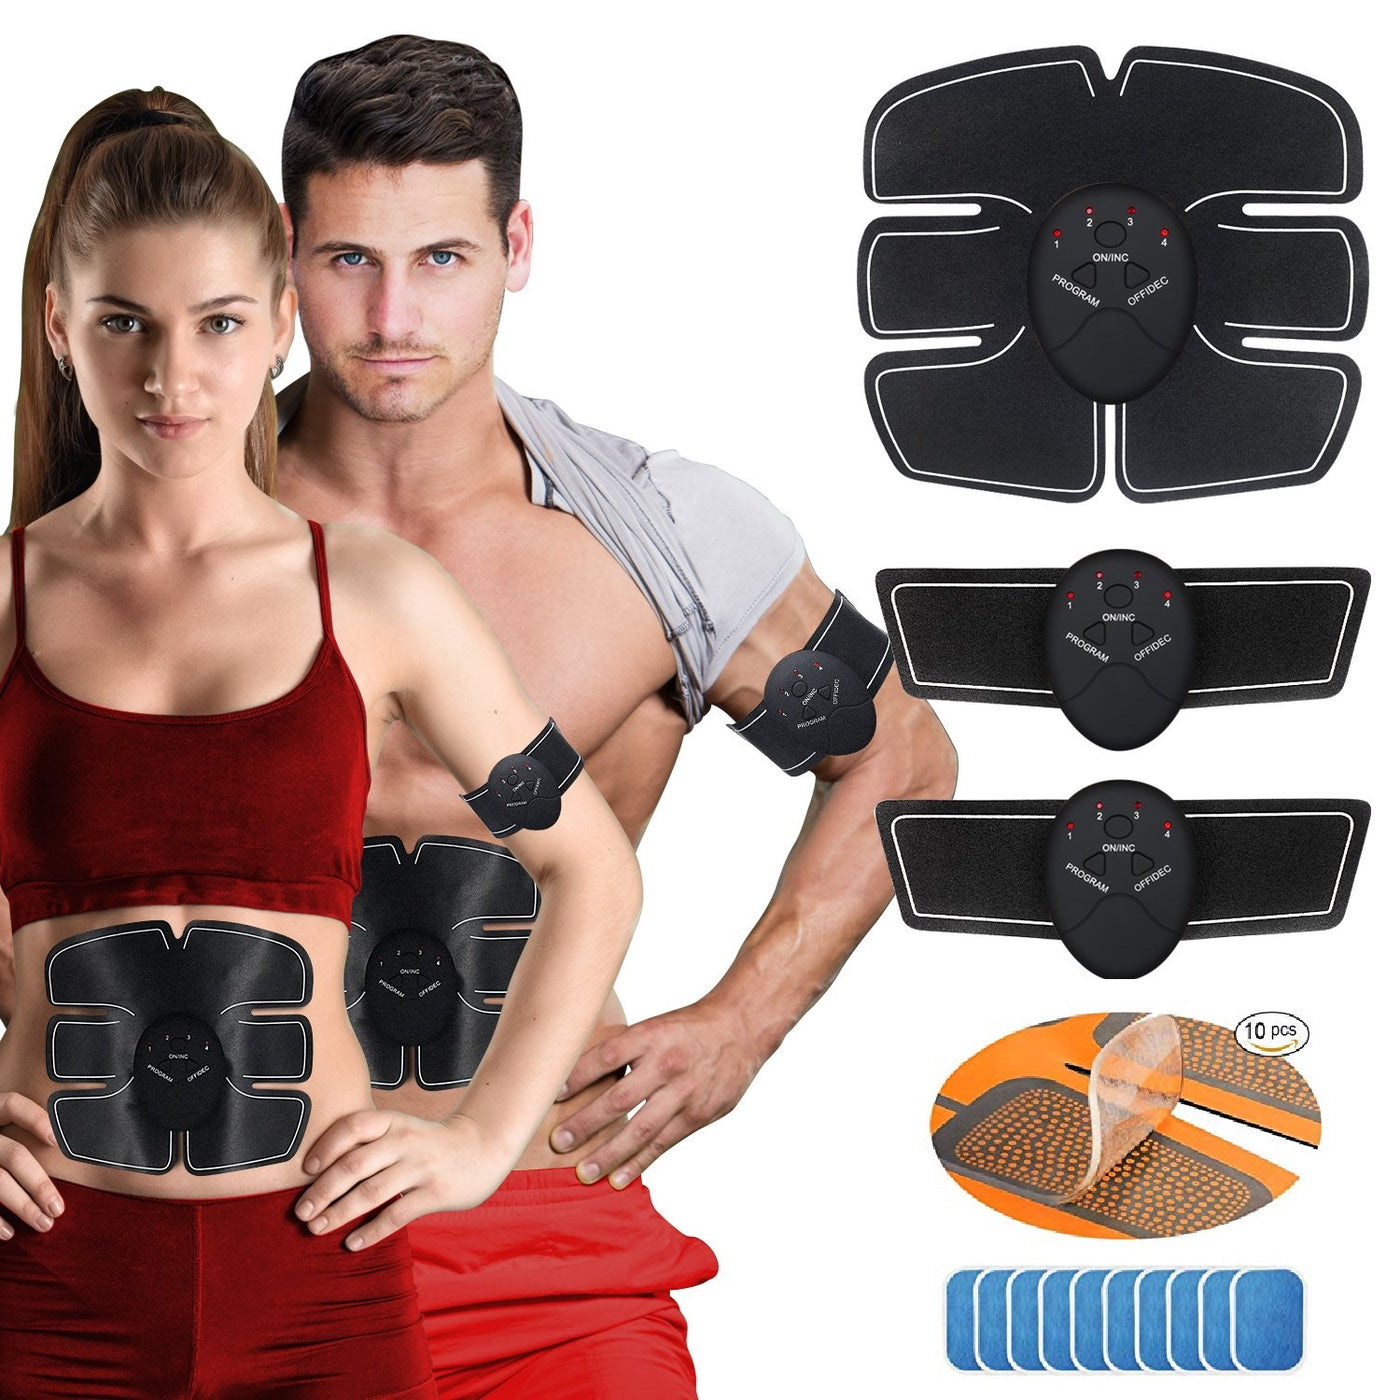 1 Ultimate ABS Stimulator,EMS Remote Control Abdominal Muscle